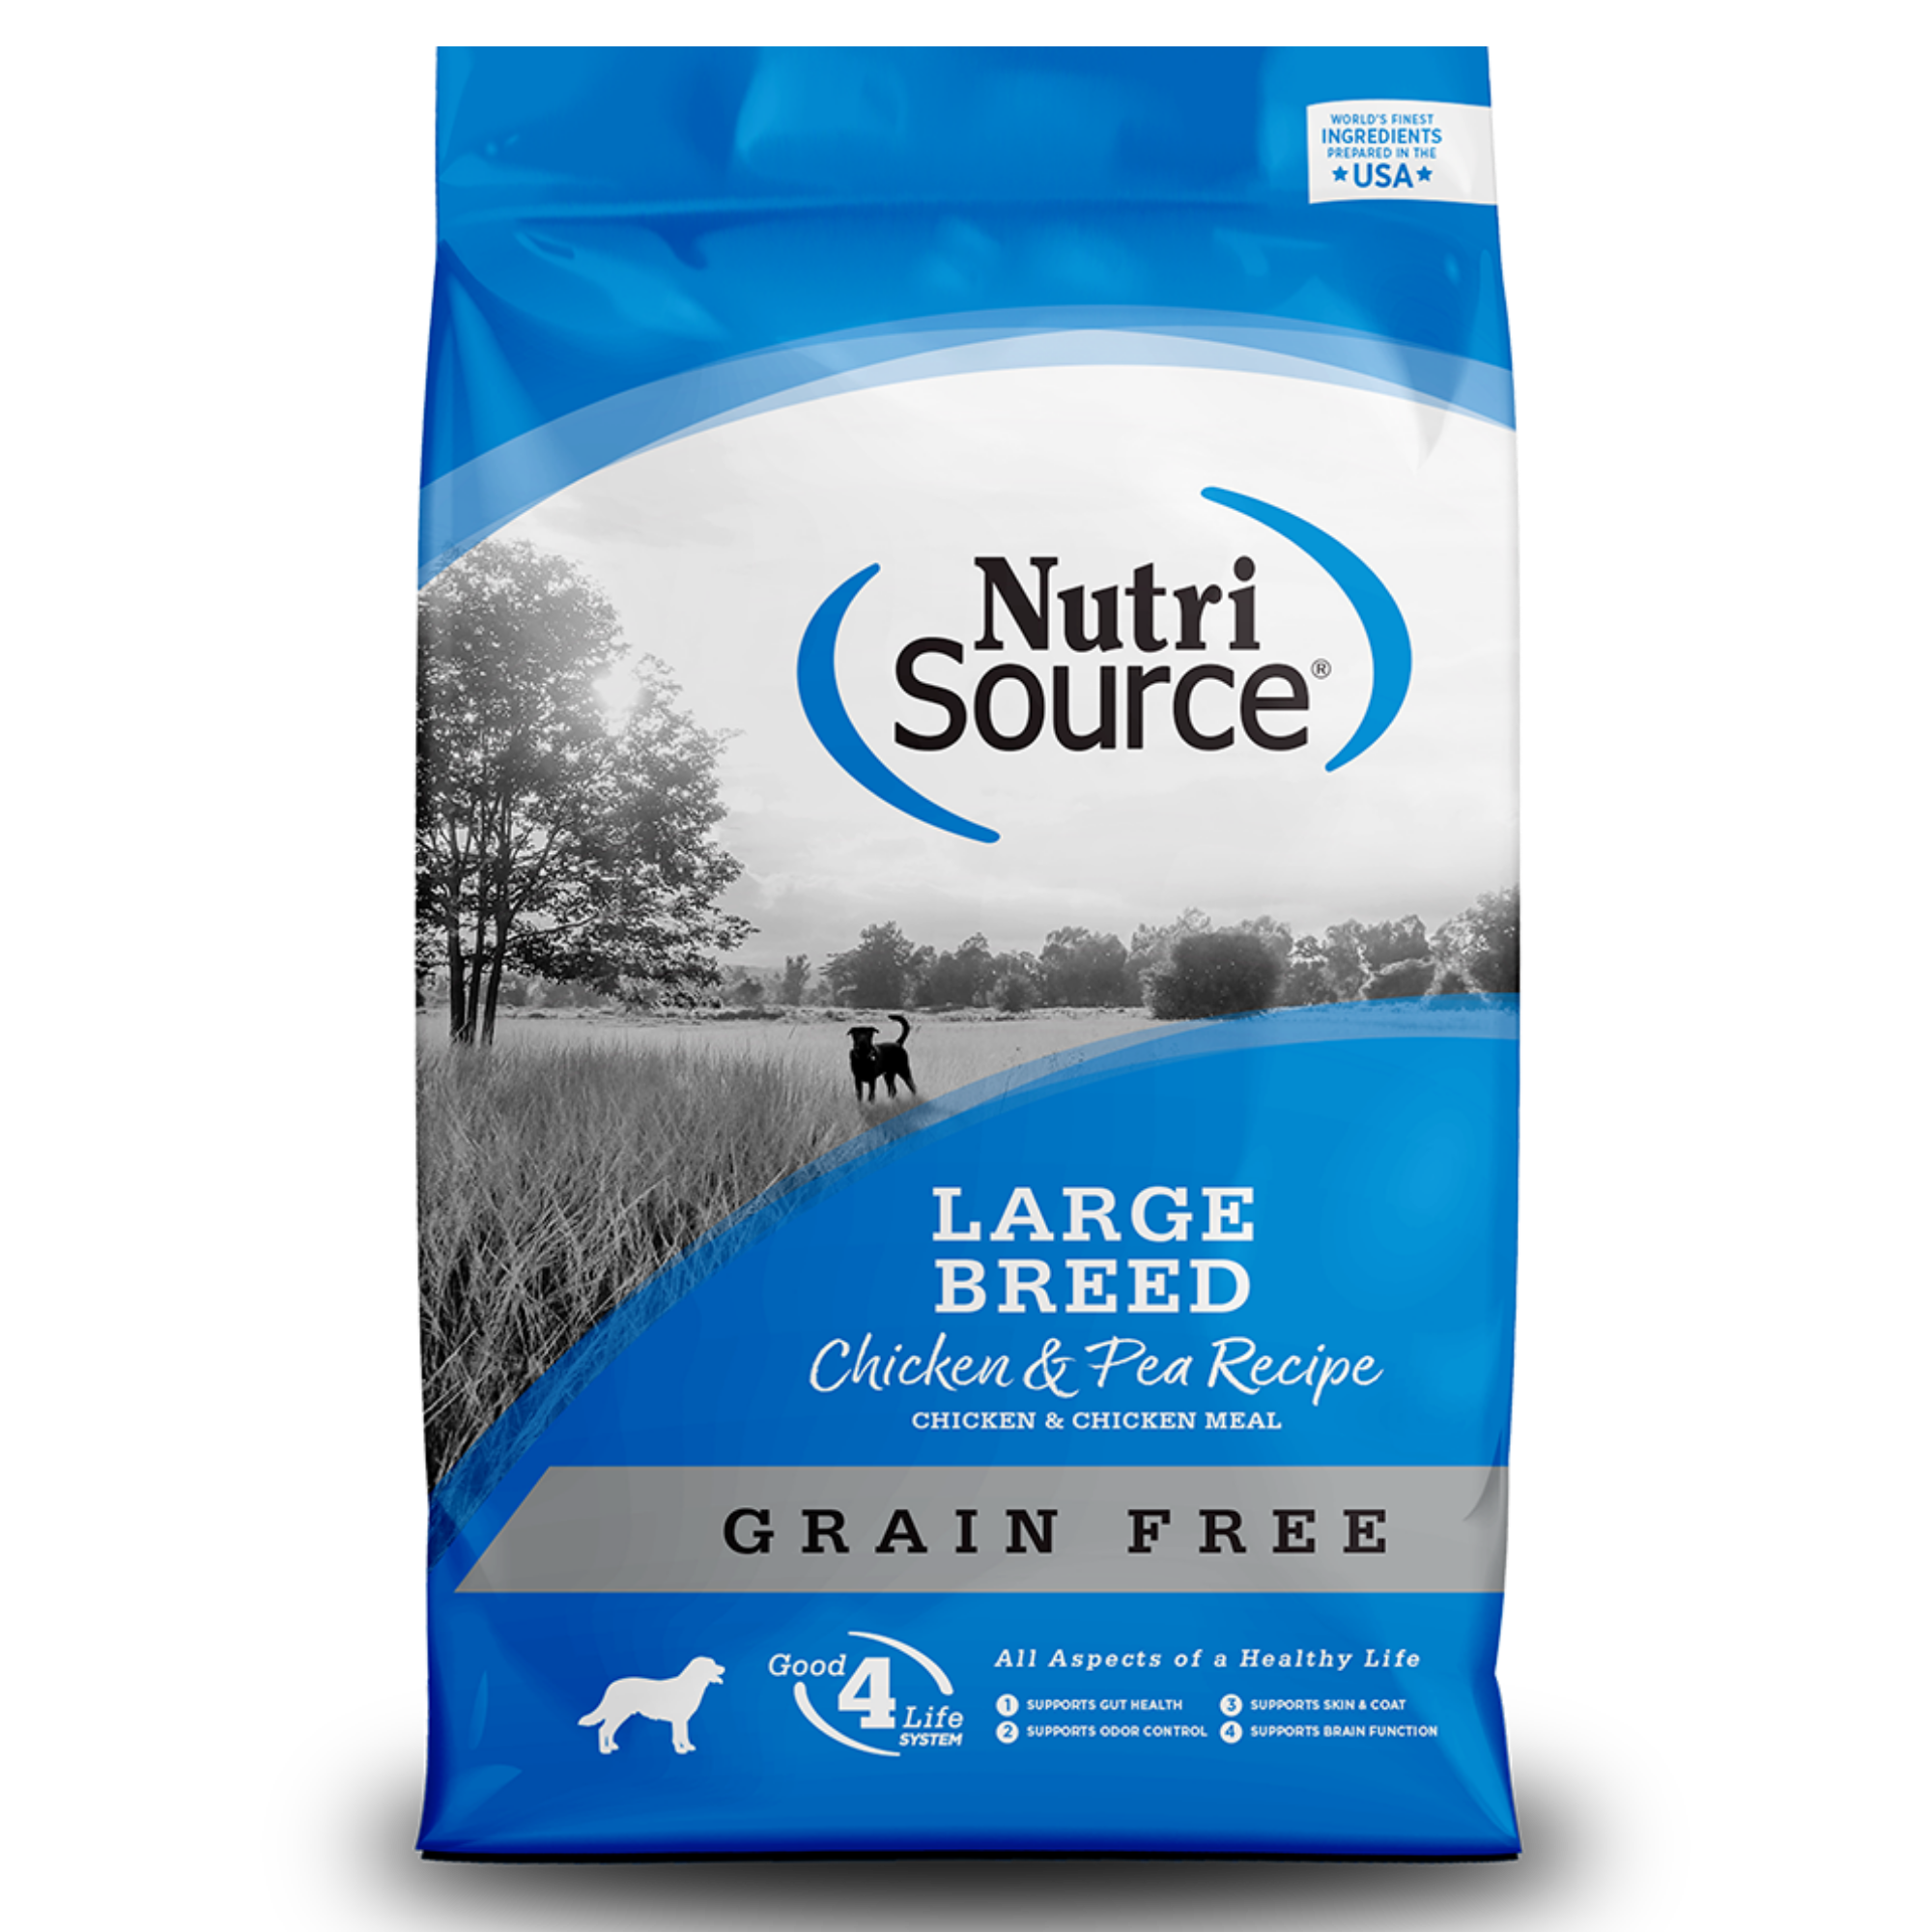 NutriSource Grain-Free Large Breed Chicken & Pea Formula Dry Dog Food - Mutts & Co.